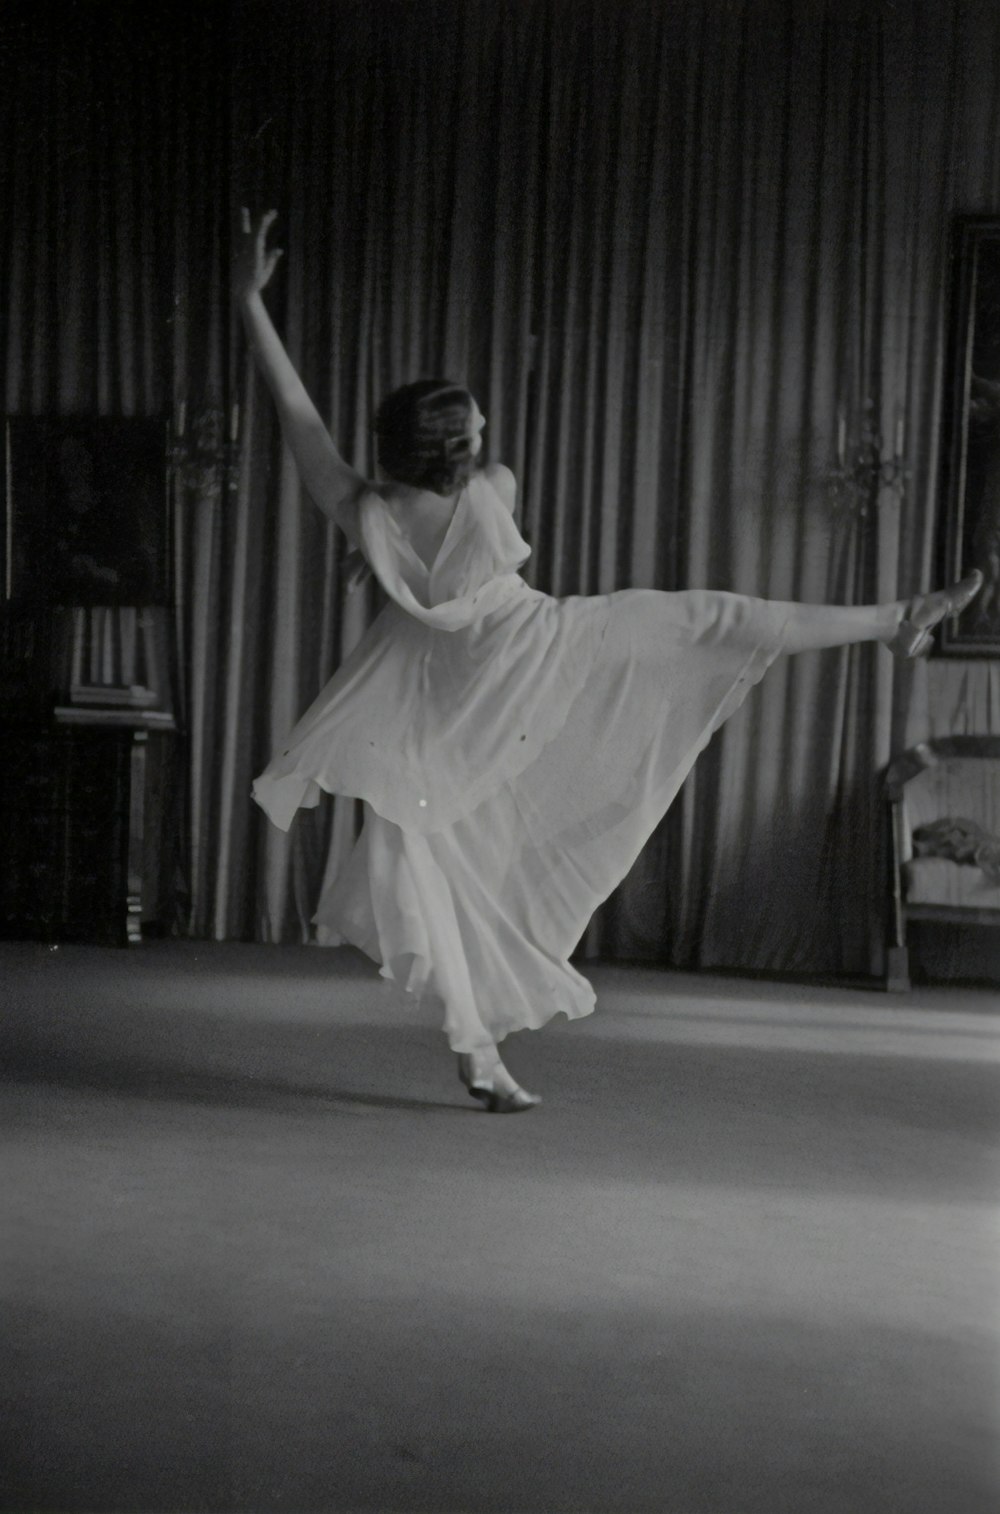 grayscale photo of woman dancing near curtains